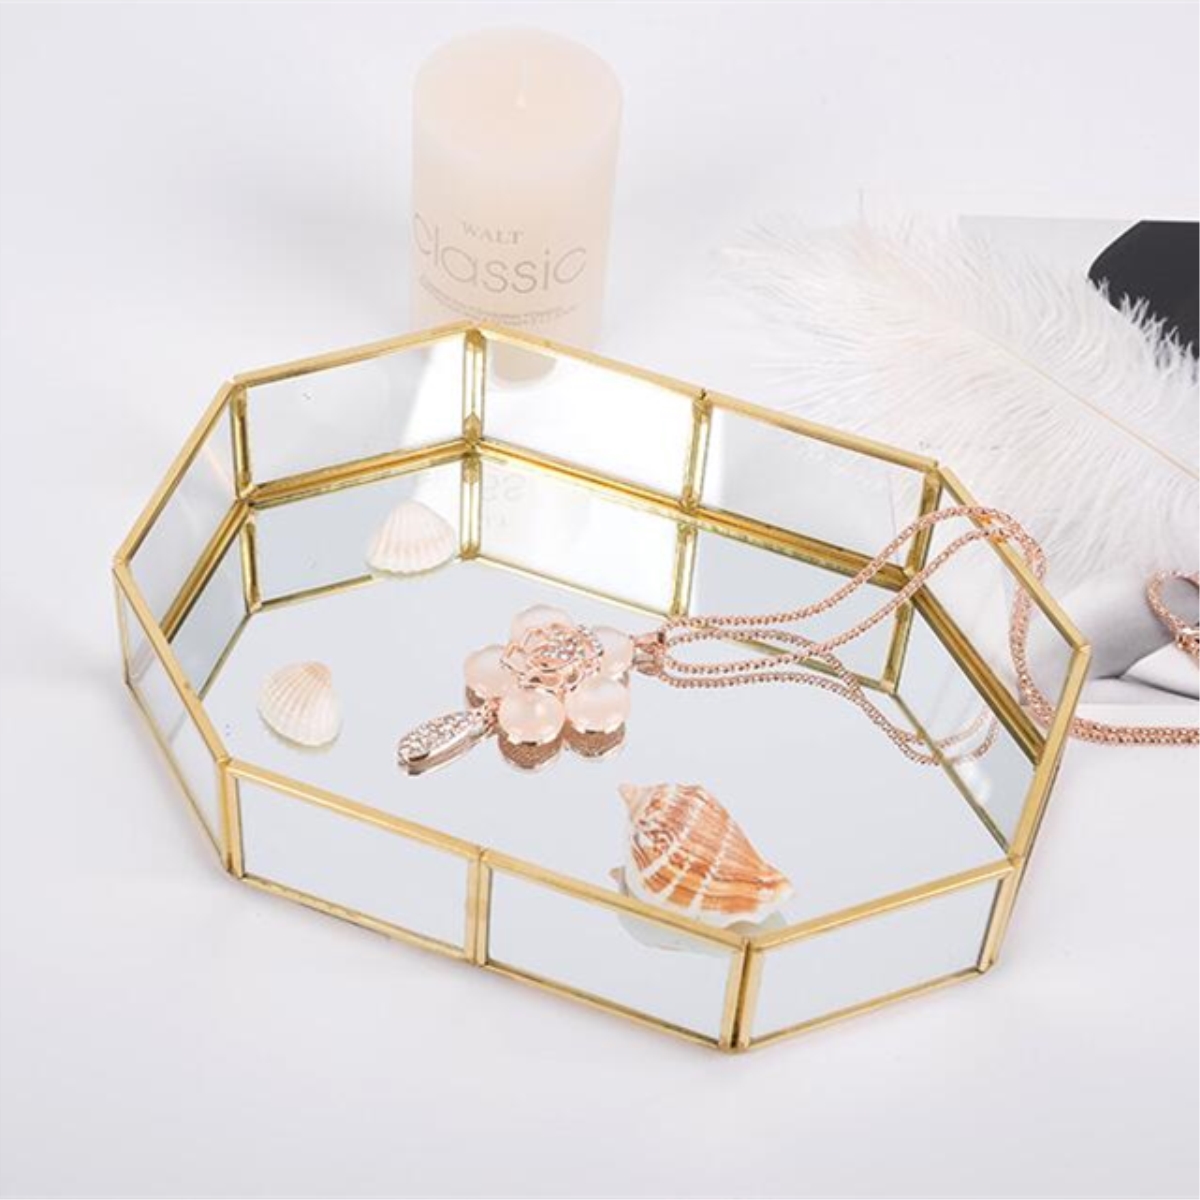 2-Size-Mirror-Glass-Tray-Octagon-Cosmetic-Makeup-Desktop-Organizer-Jewelry-Display-Stand-Holder-1382768-3